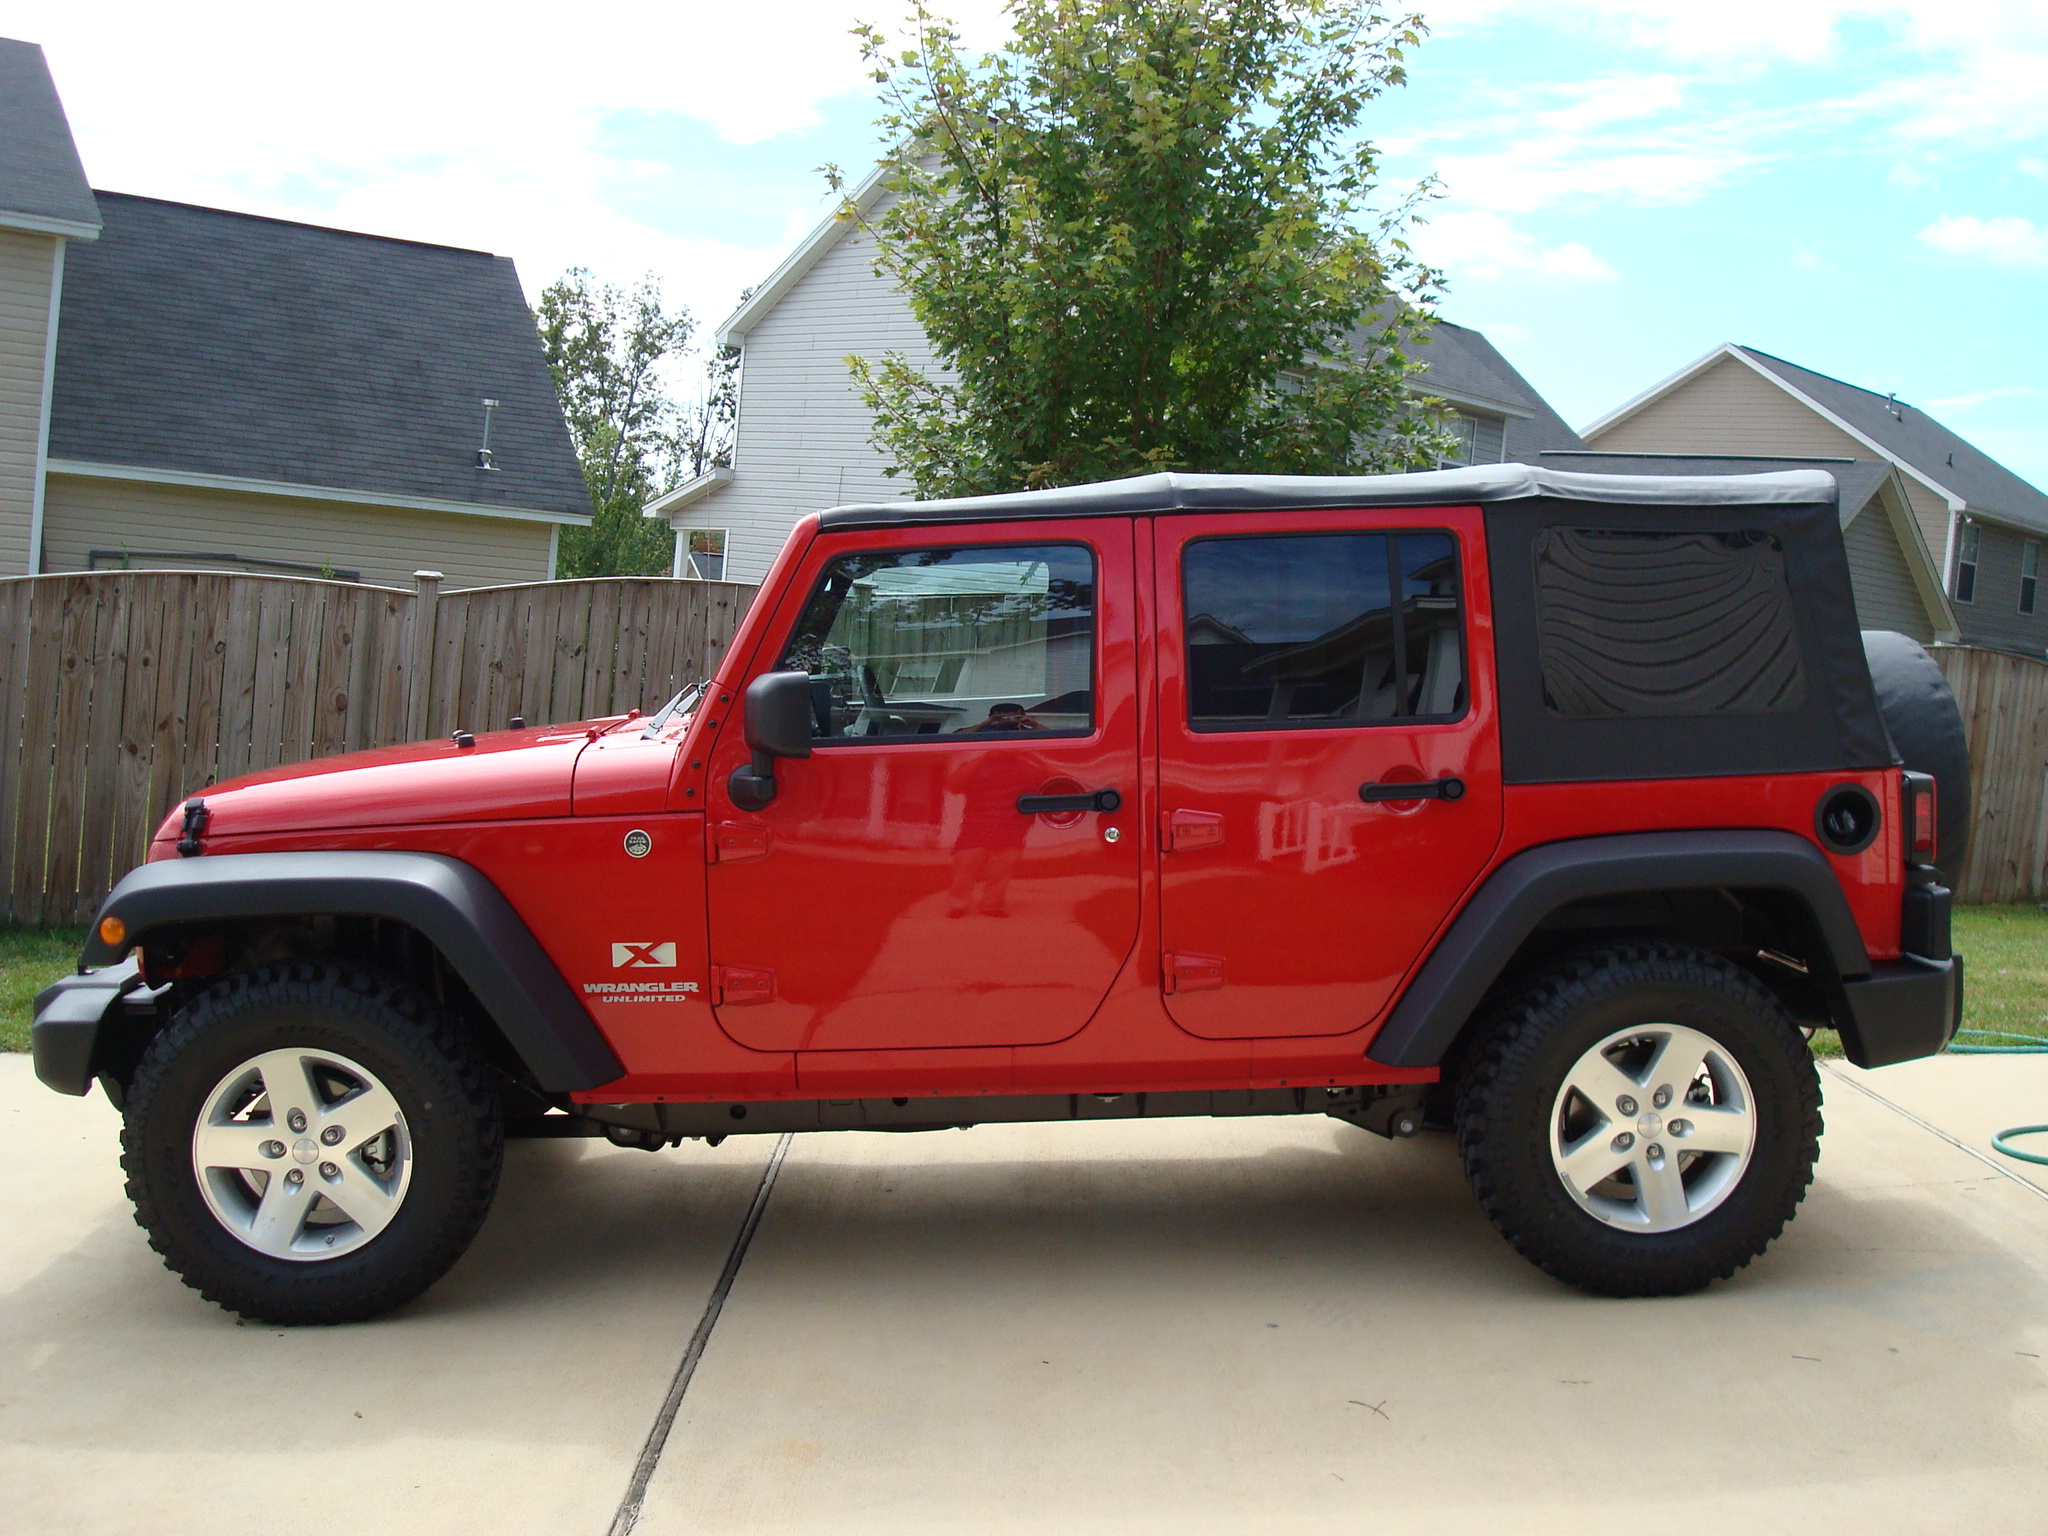 My new Jeep.  First Wrangler in 10 years